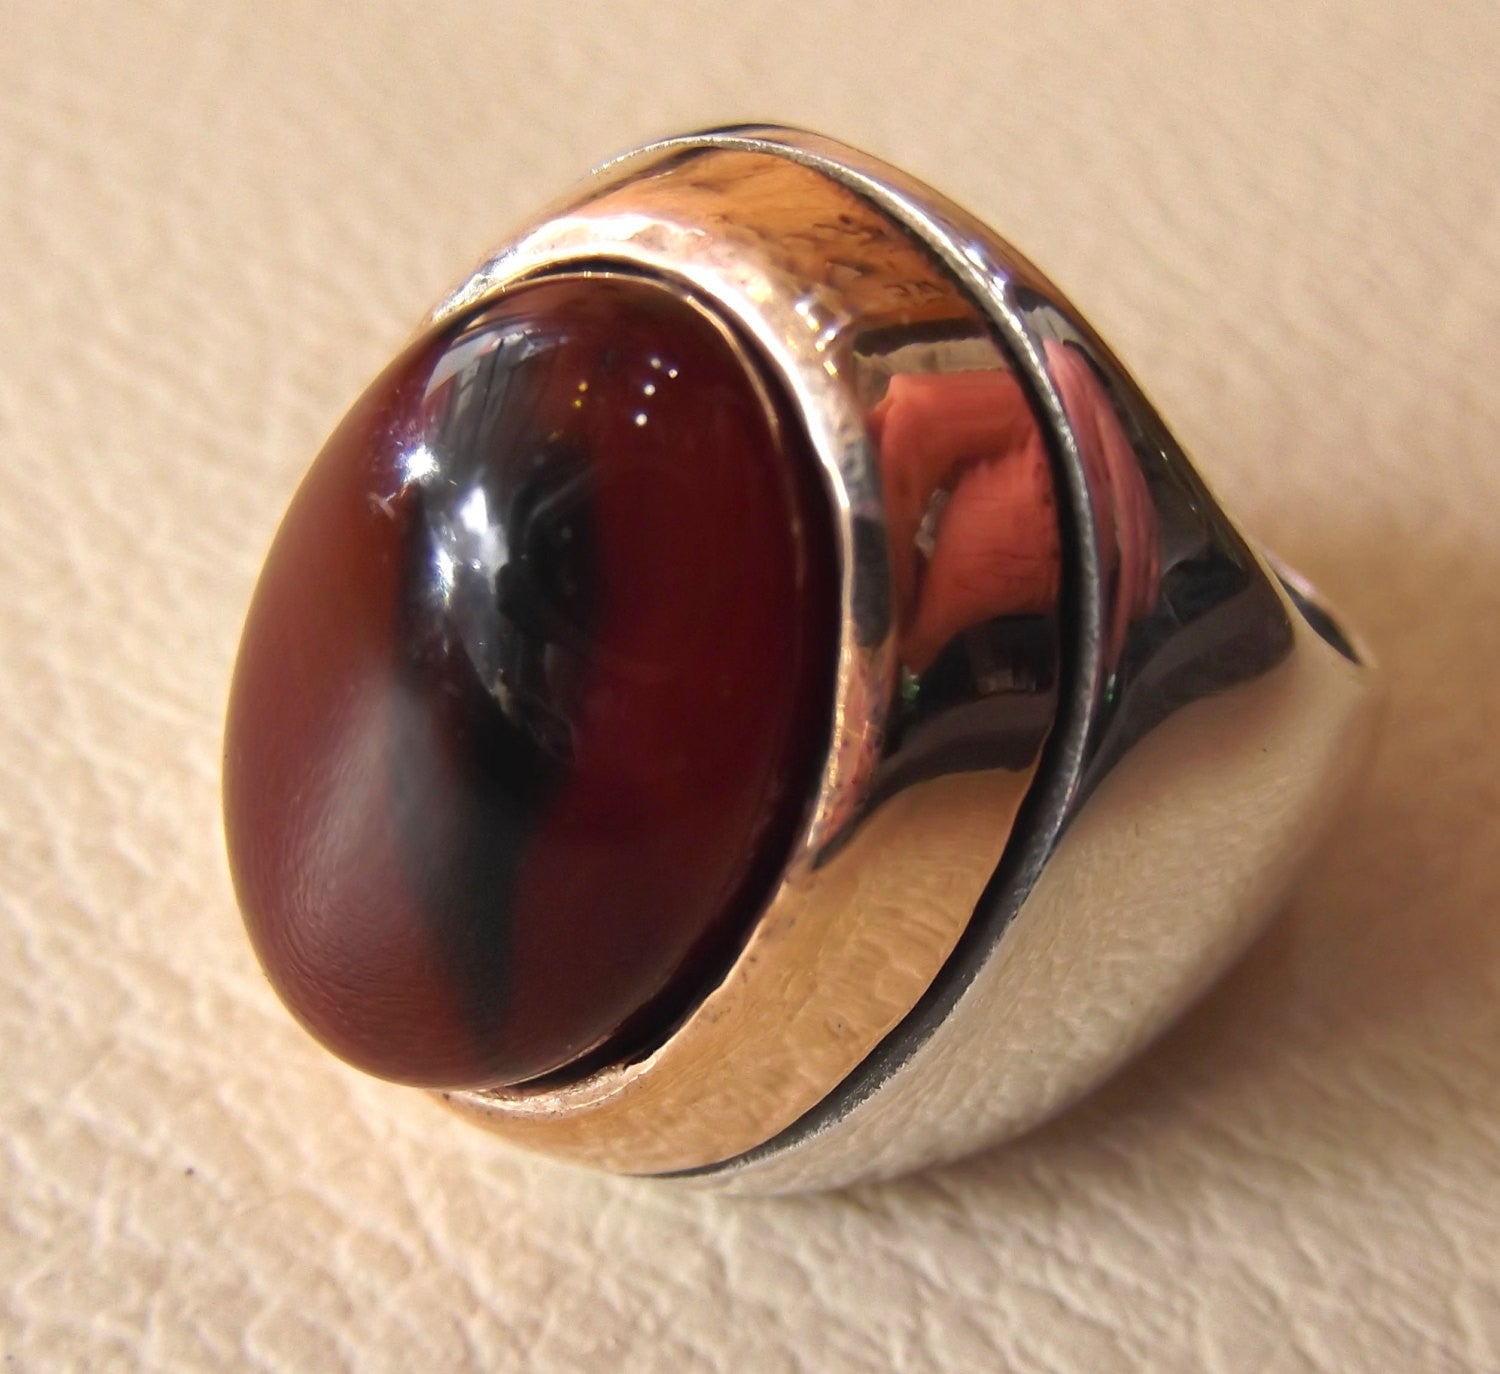 dark lace agate aqeeq liver red and black semi precious natural stone huge heavy ring sterling silver 925 bronze frame all sizes jewelry